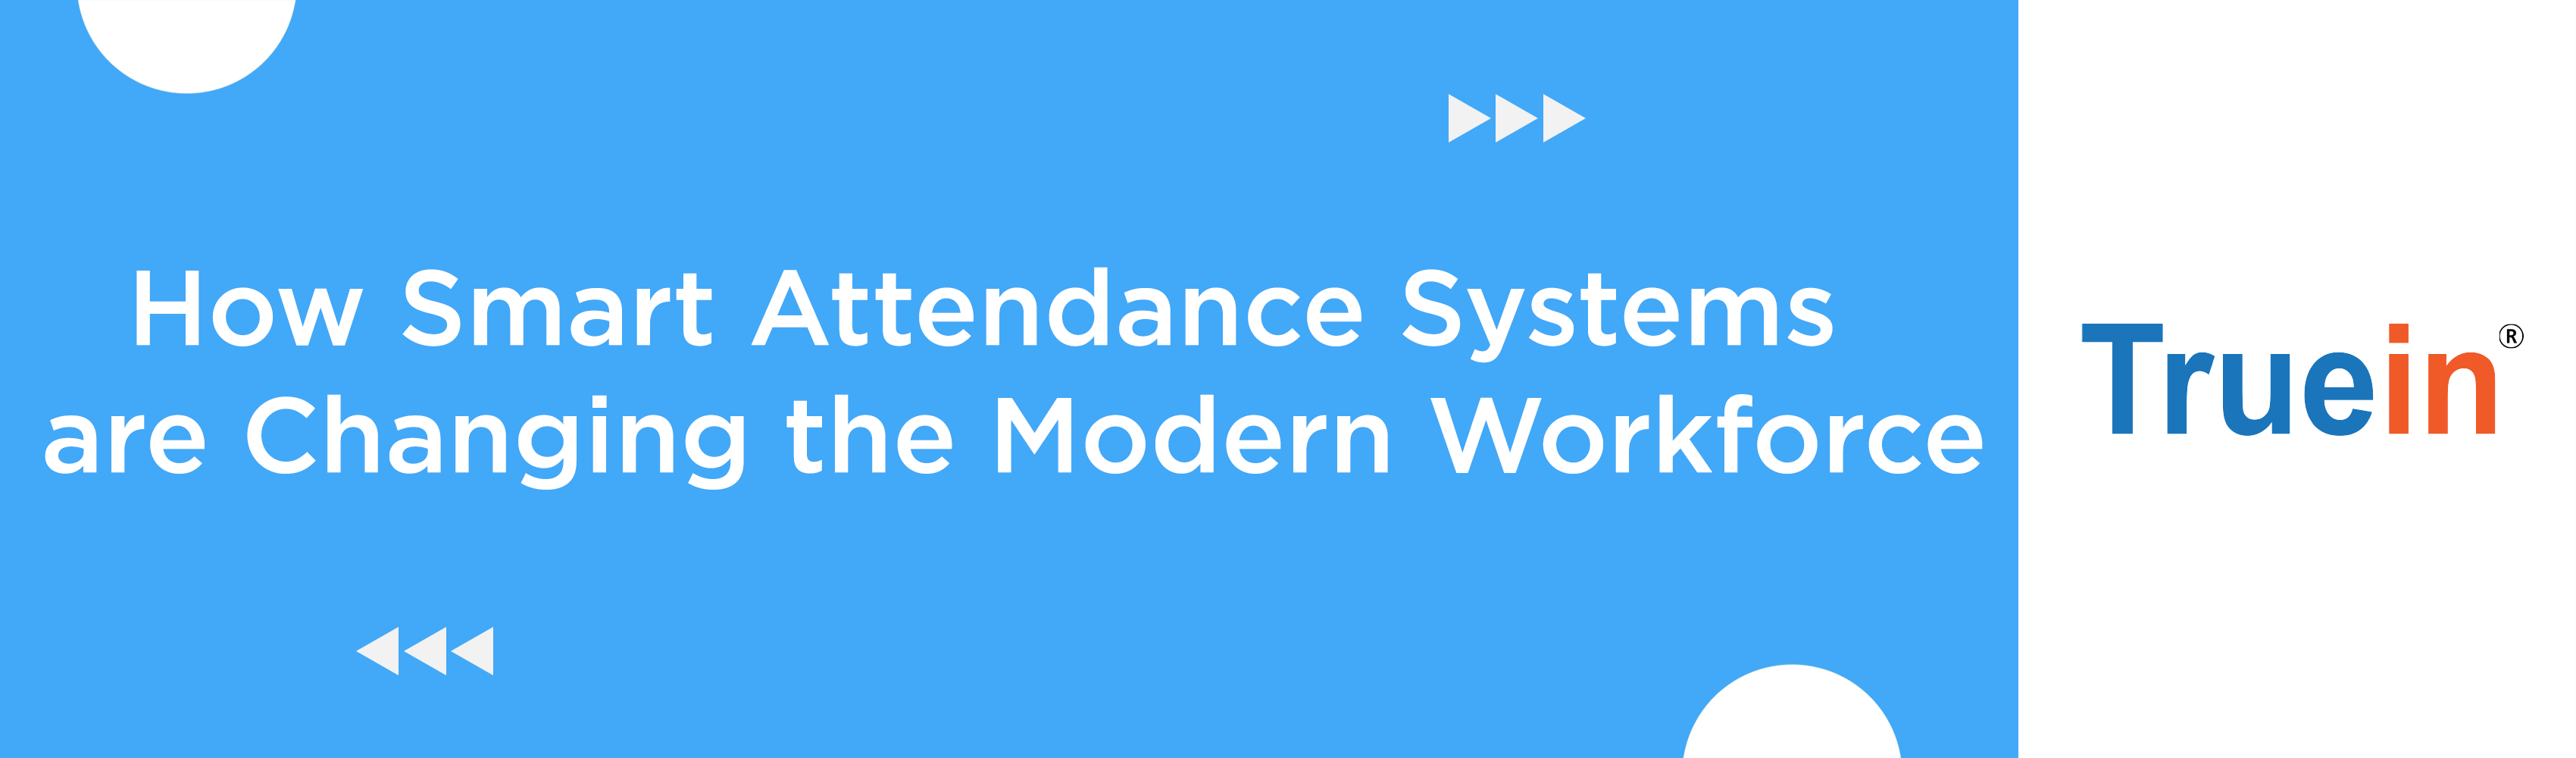 How Smart Attendance Systems Using IoT & Face Recognition are Changing the Modern Workforce